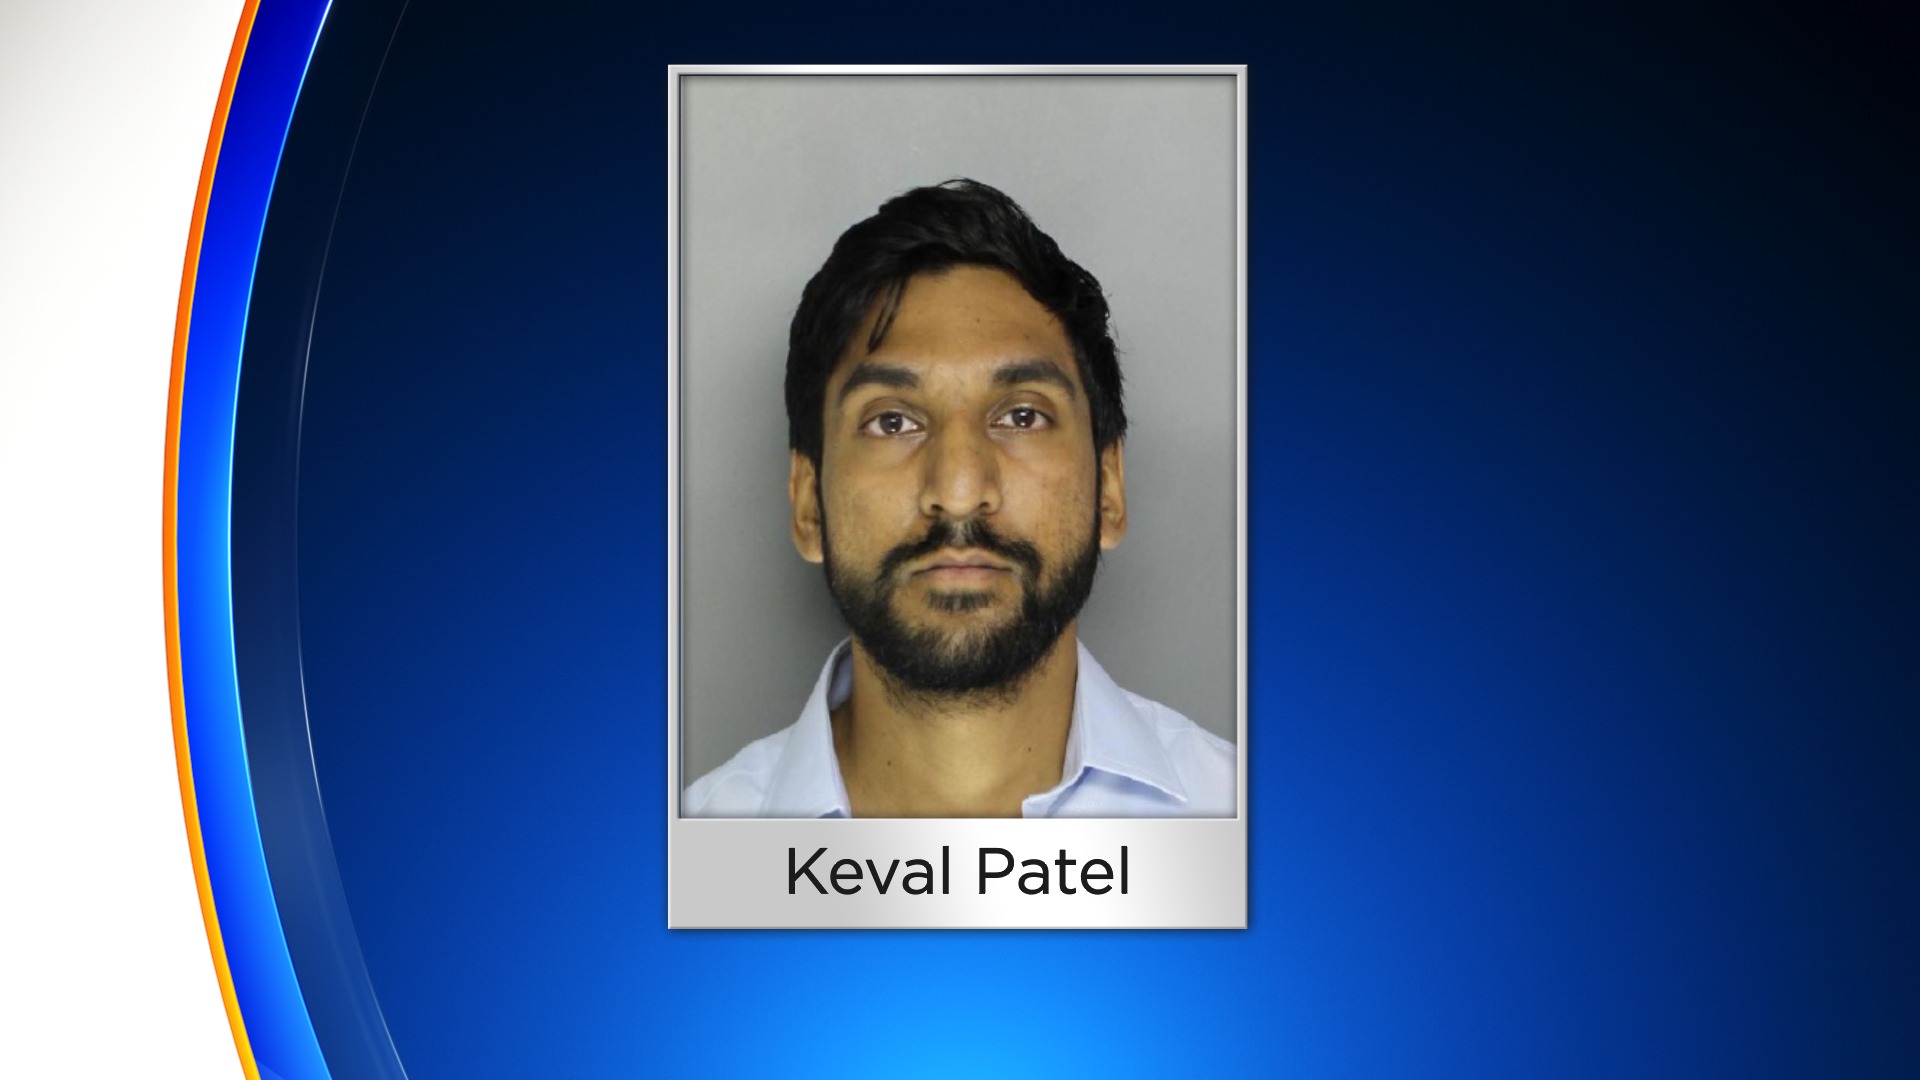 Bensalem Man Tried To Meet Up For Sex With 12-Year-Old Girl He Met On KIK App, Police Say